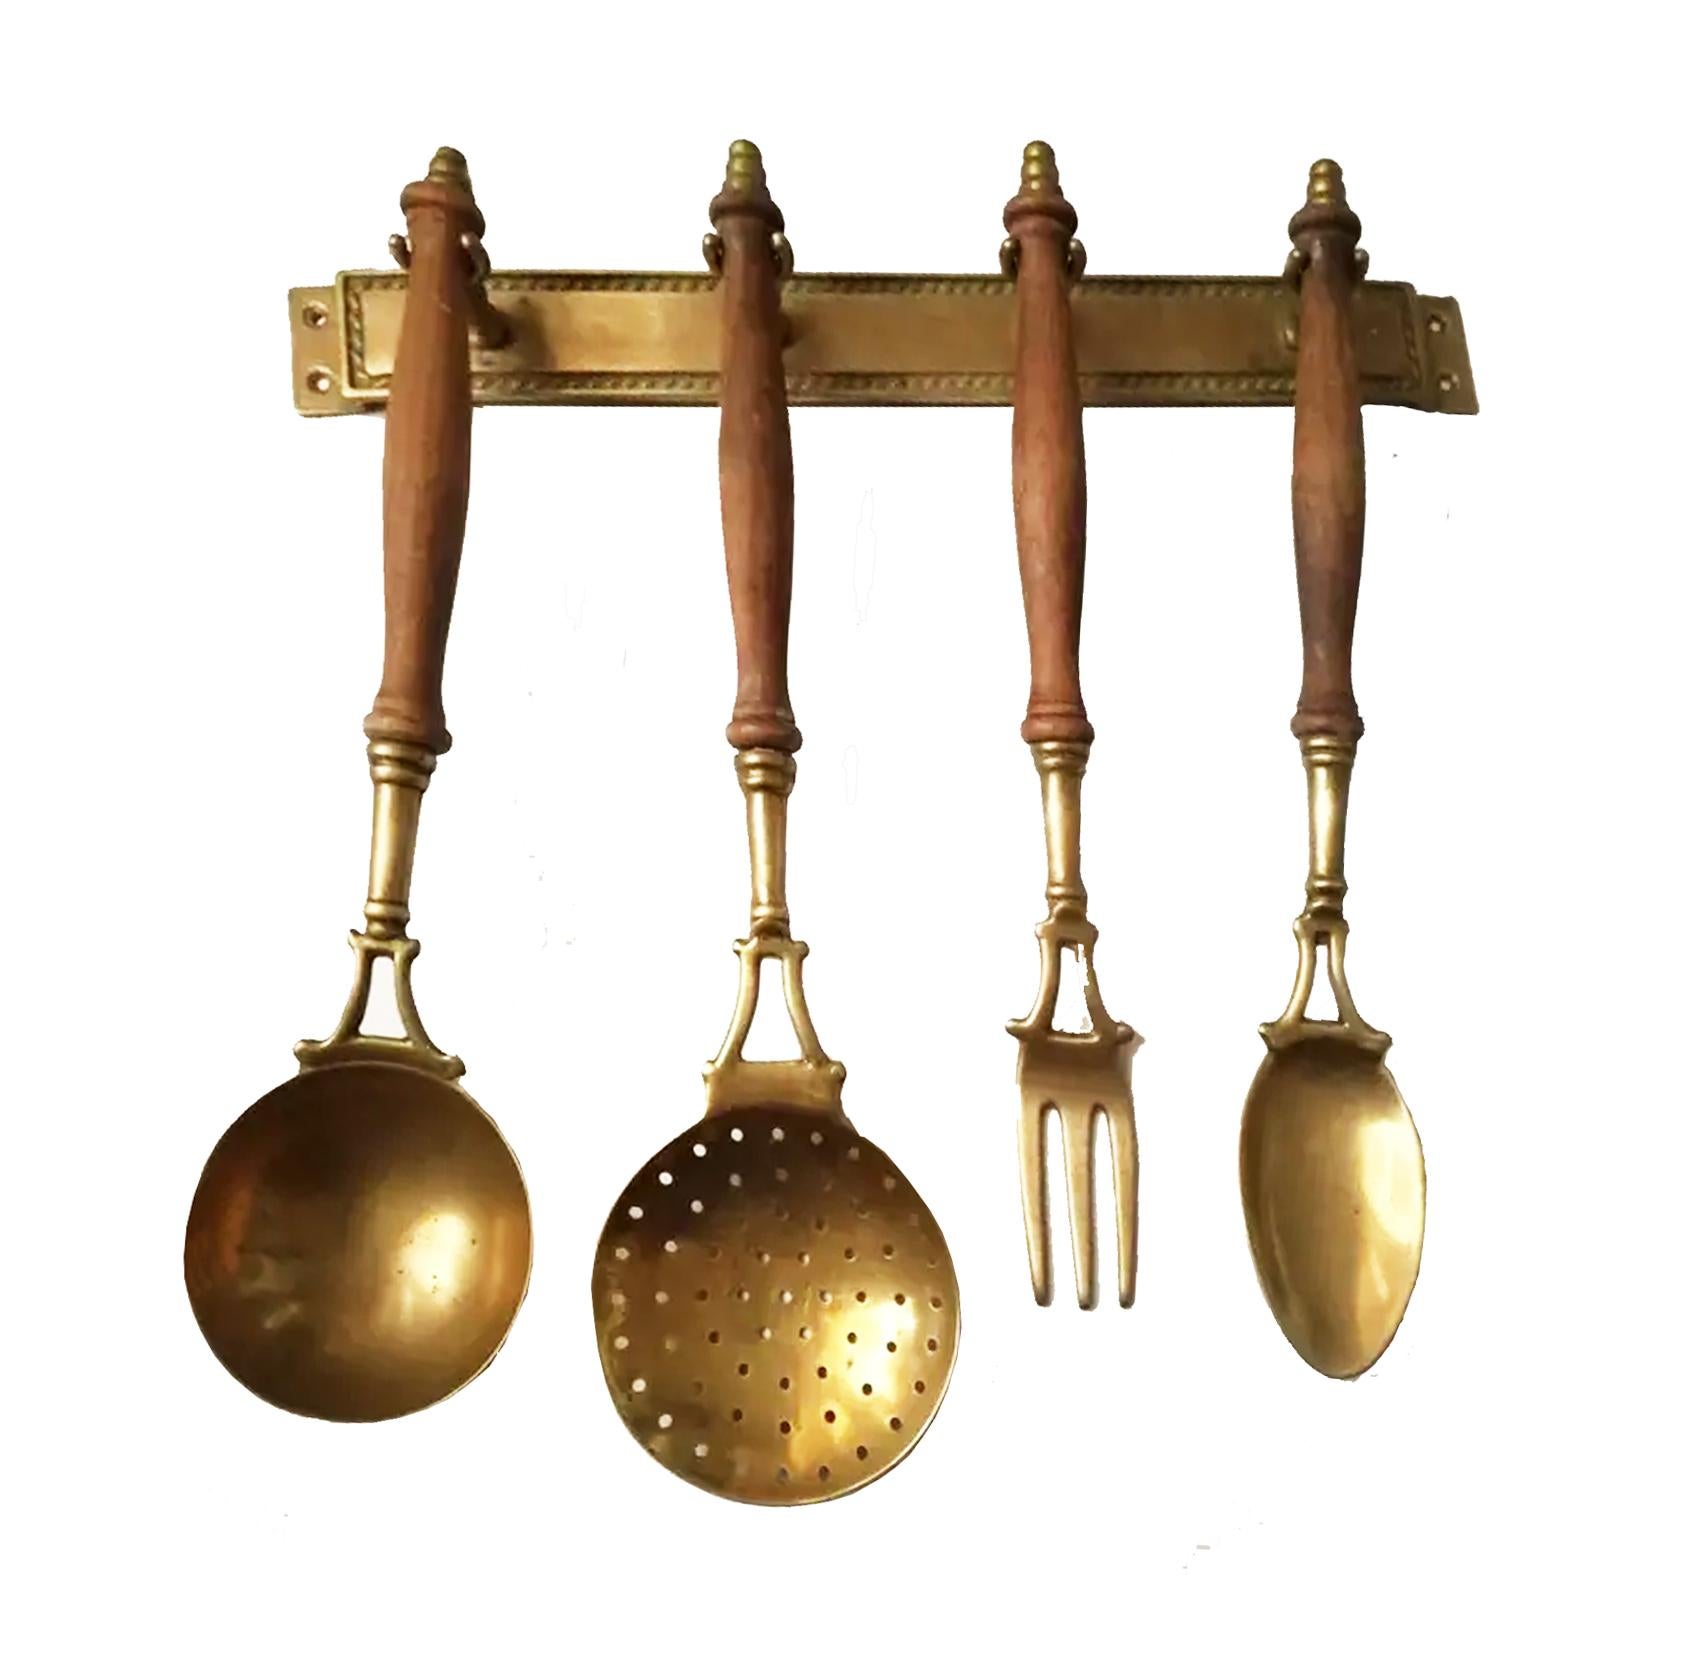 Old Kitchen Utensils Made of Brass with from a Hanging Bar, Early 20th Century 1